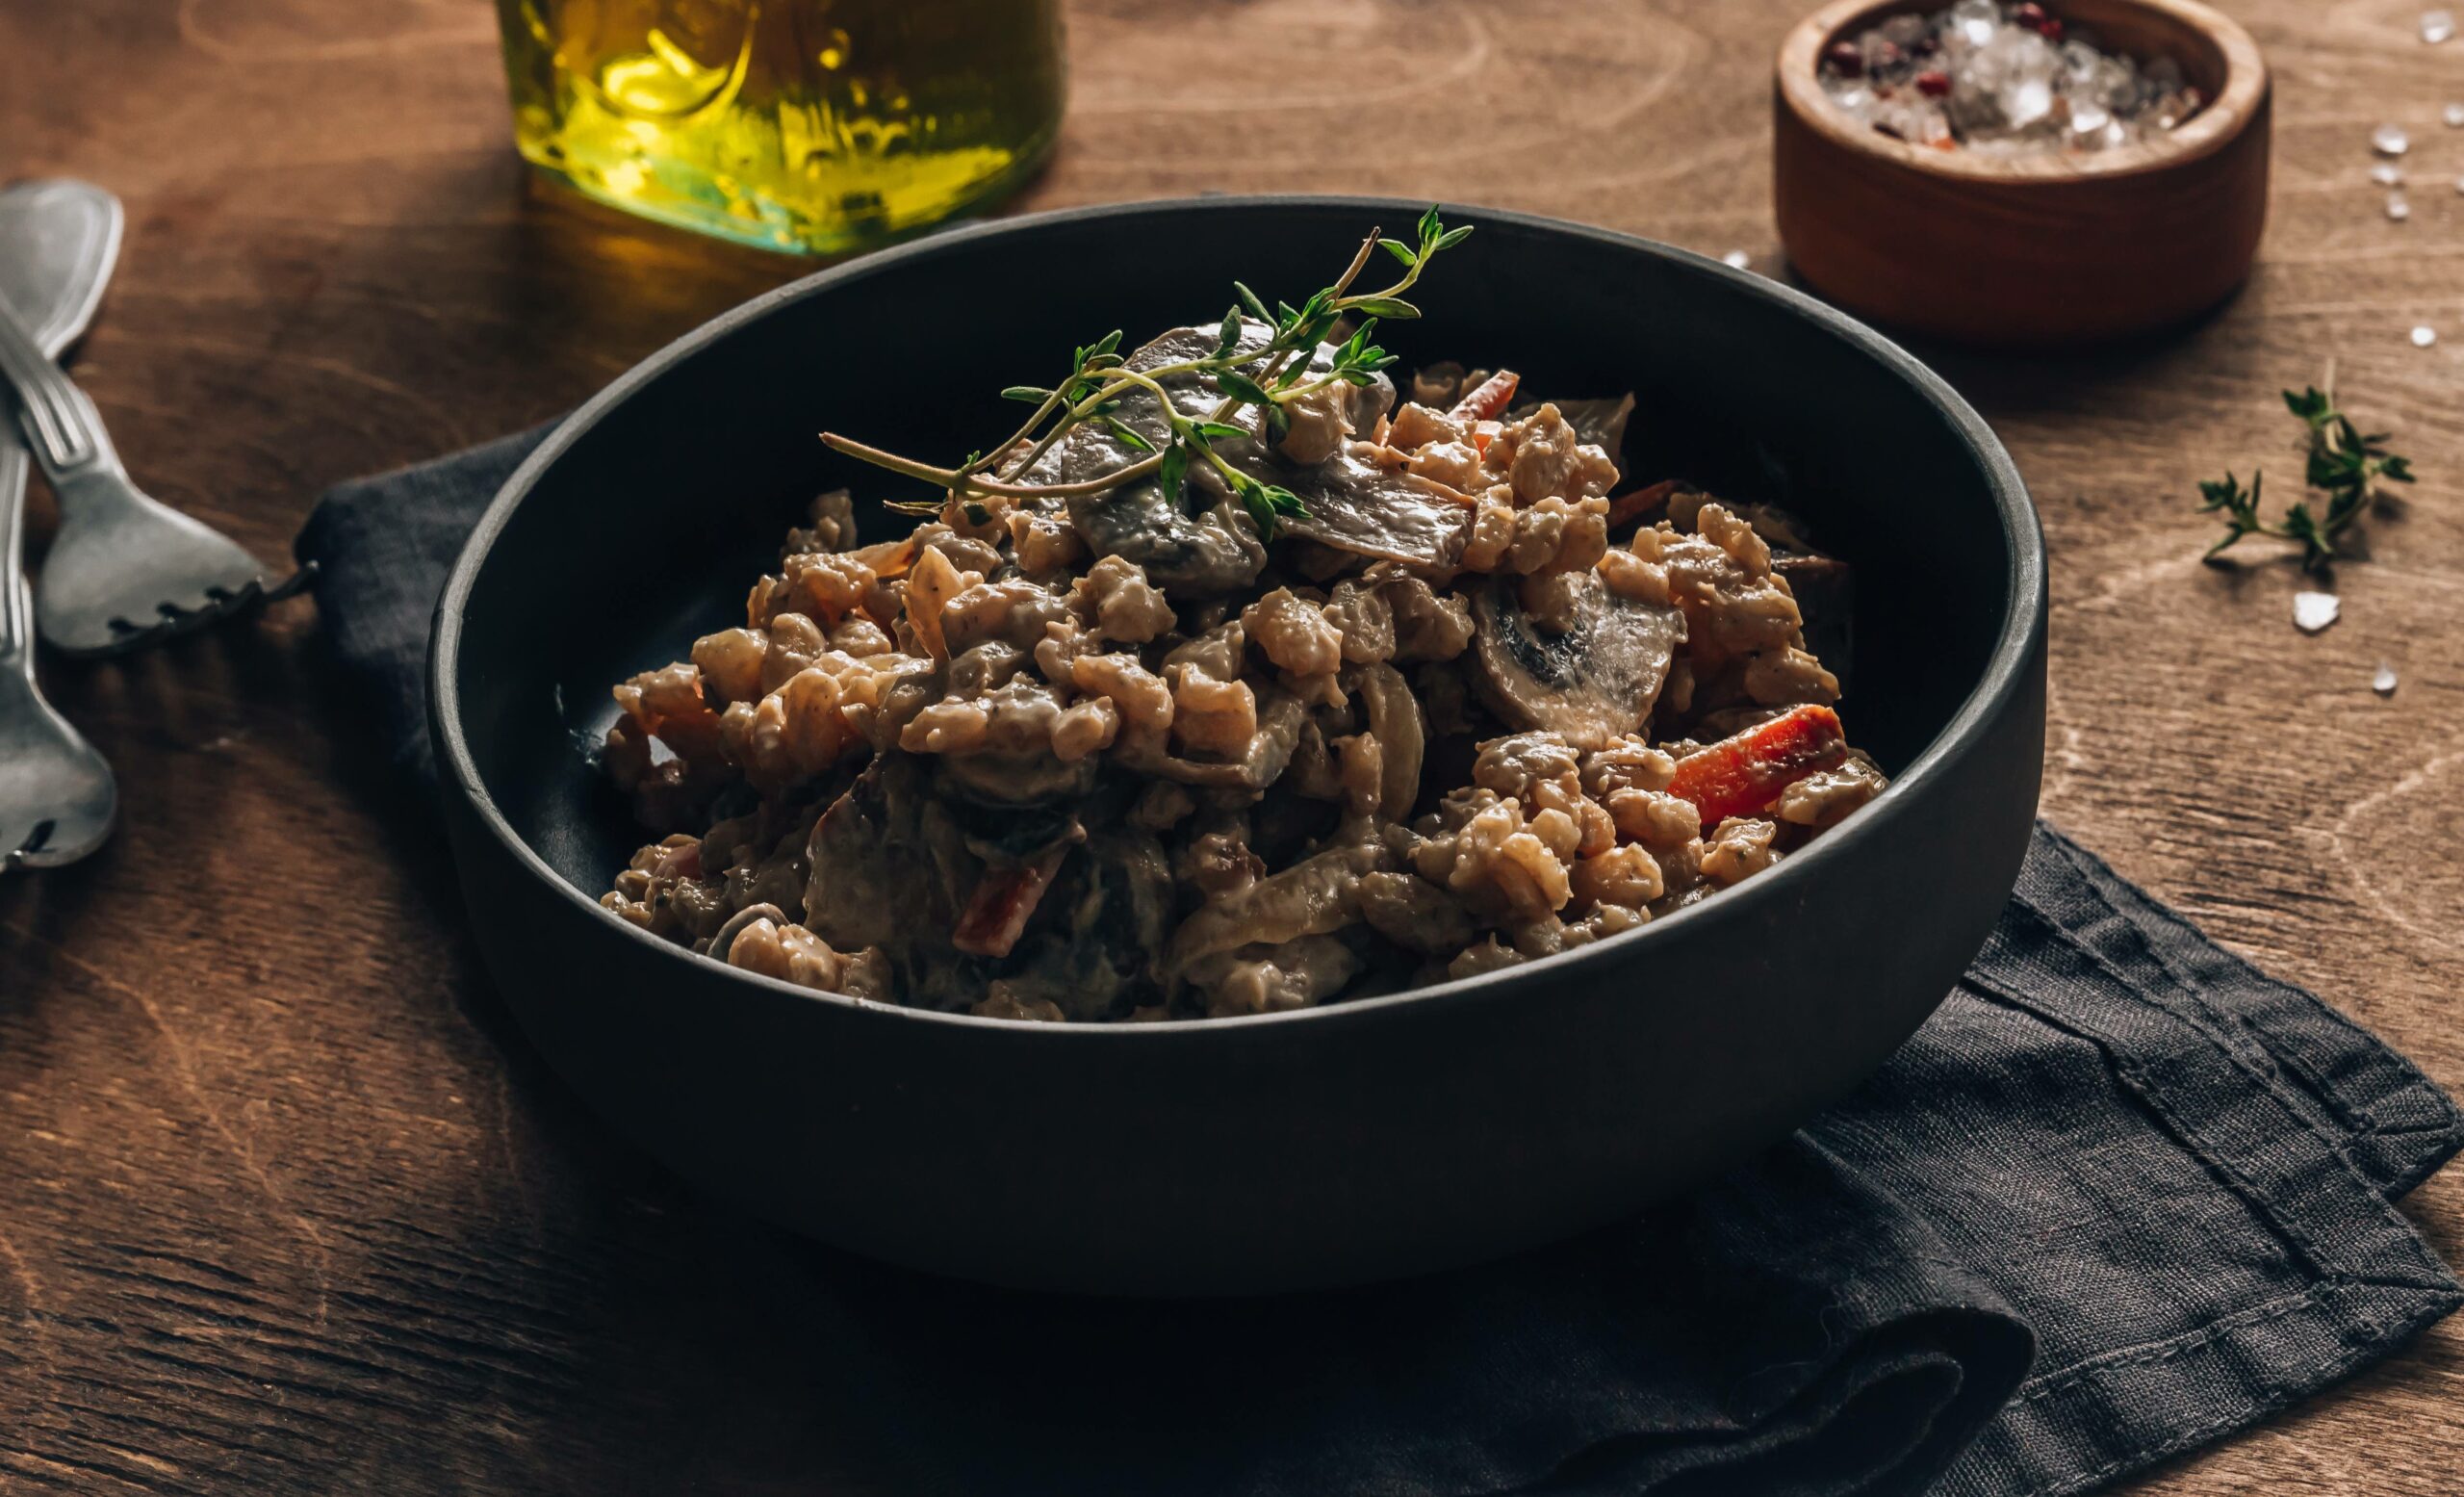 Homemade,Creamy,Vegan,Risotto,Or,Orzotto,With,Barley,,Mushrooms,And